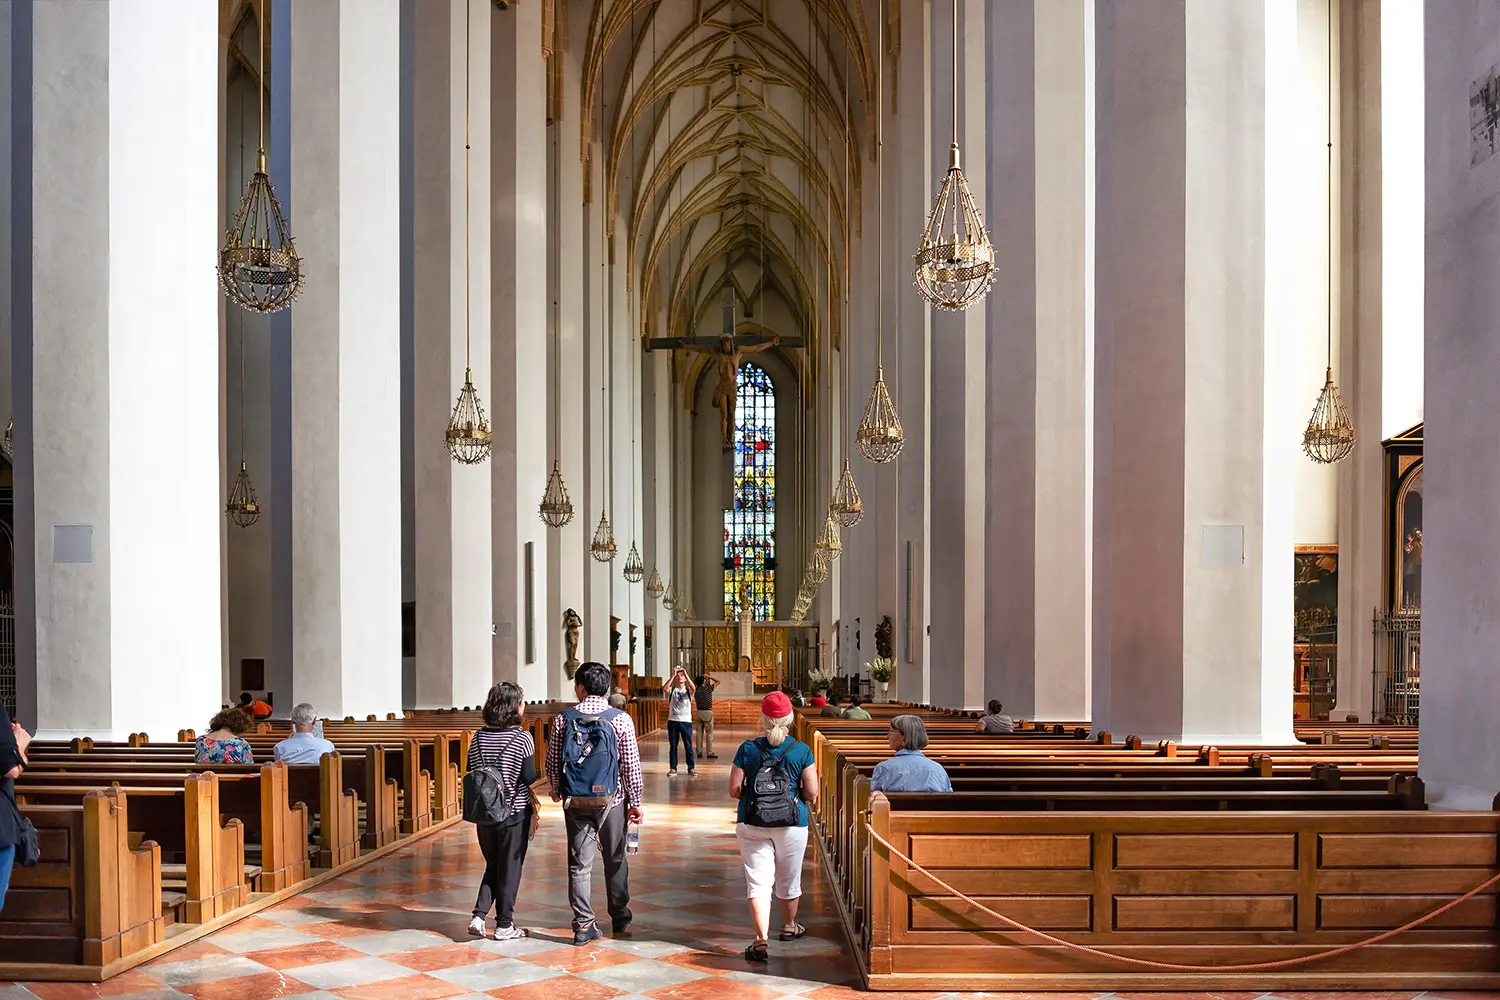 Interior of the cathedral of Our Lady Frauenkirche in Munich, Germany